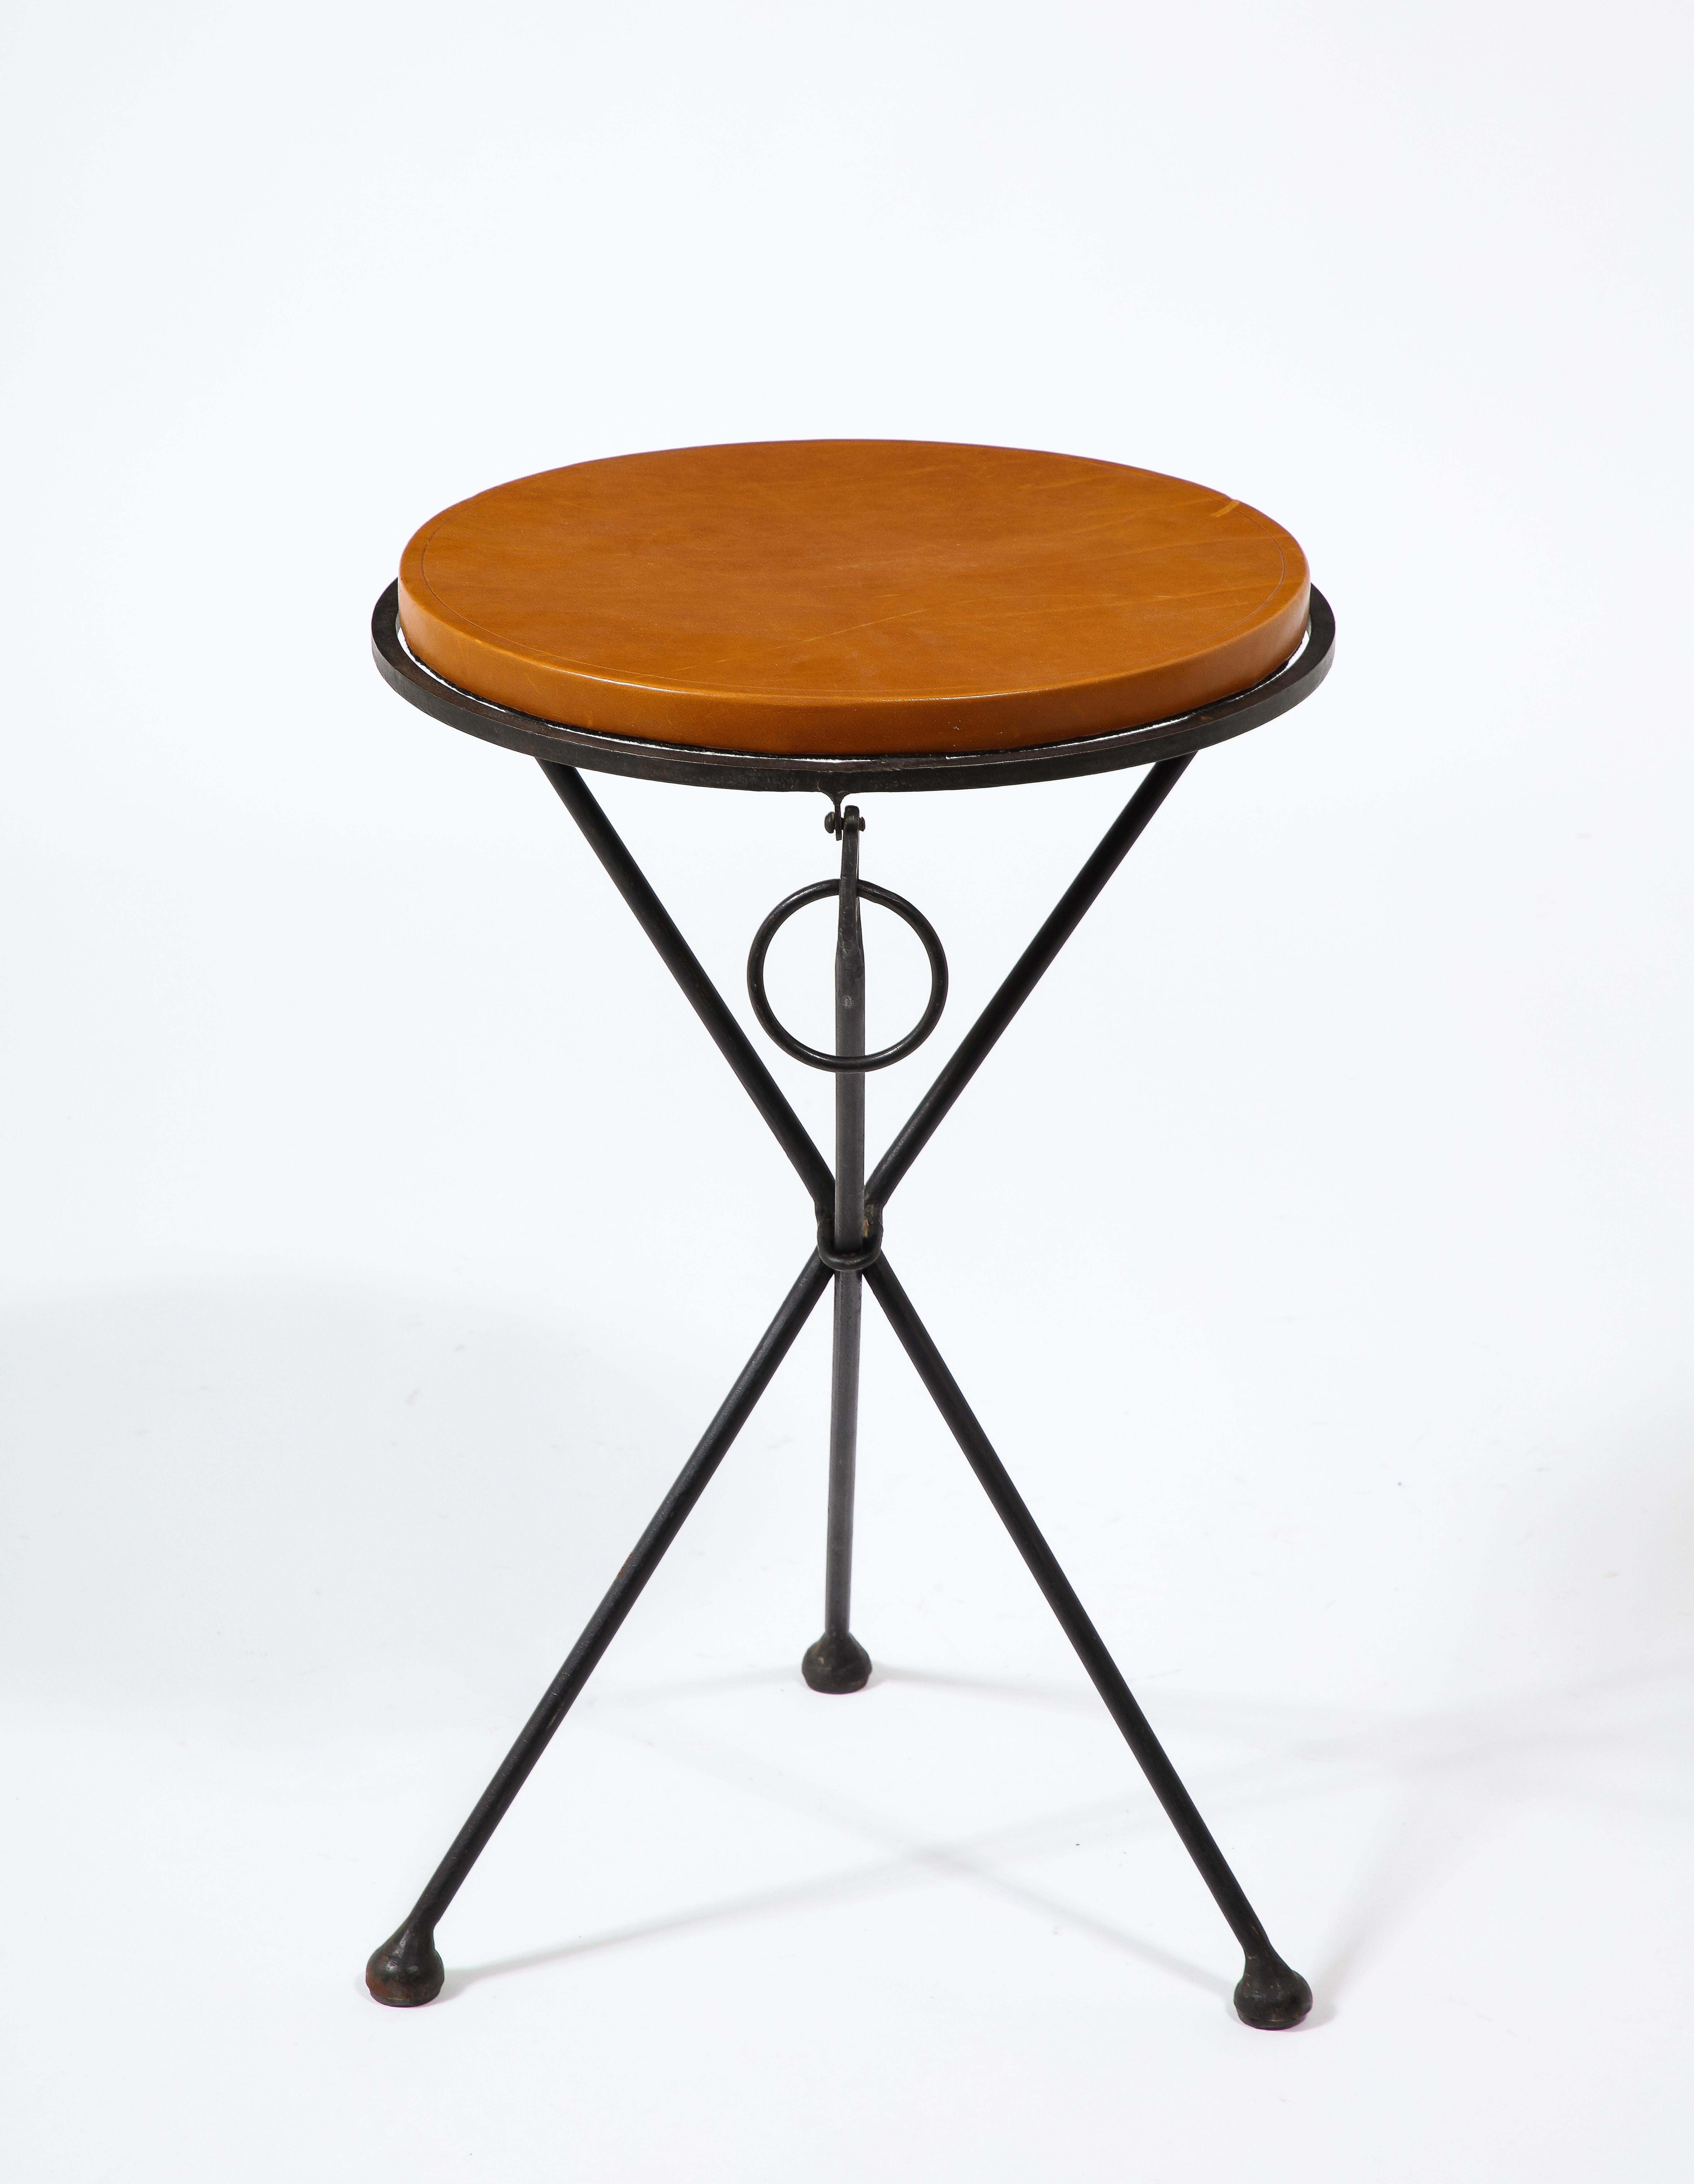 Folding Wrought Iron End Table with Leather Top, France 1960's For Sale 1